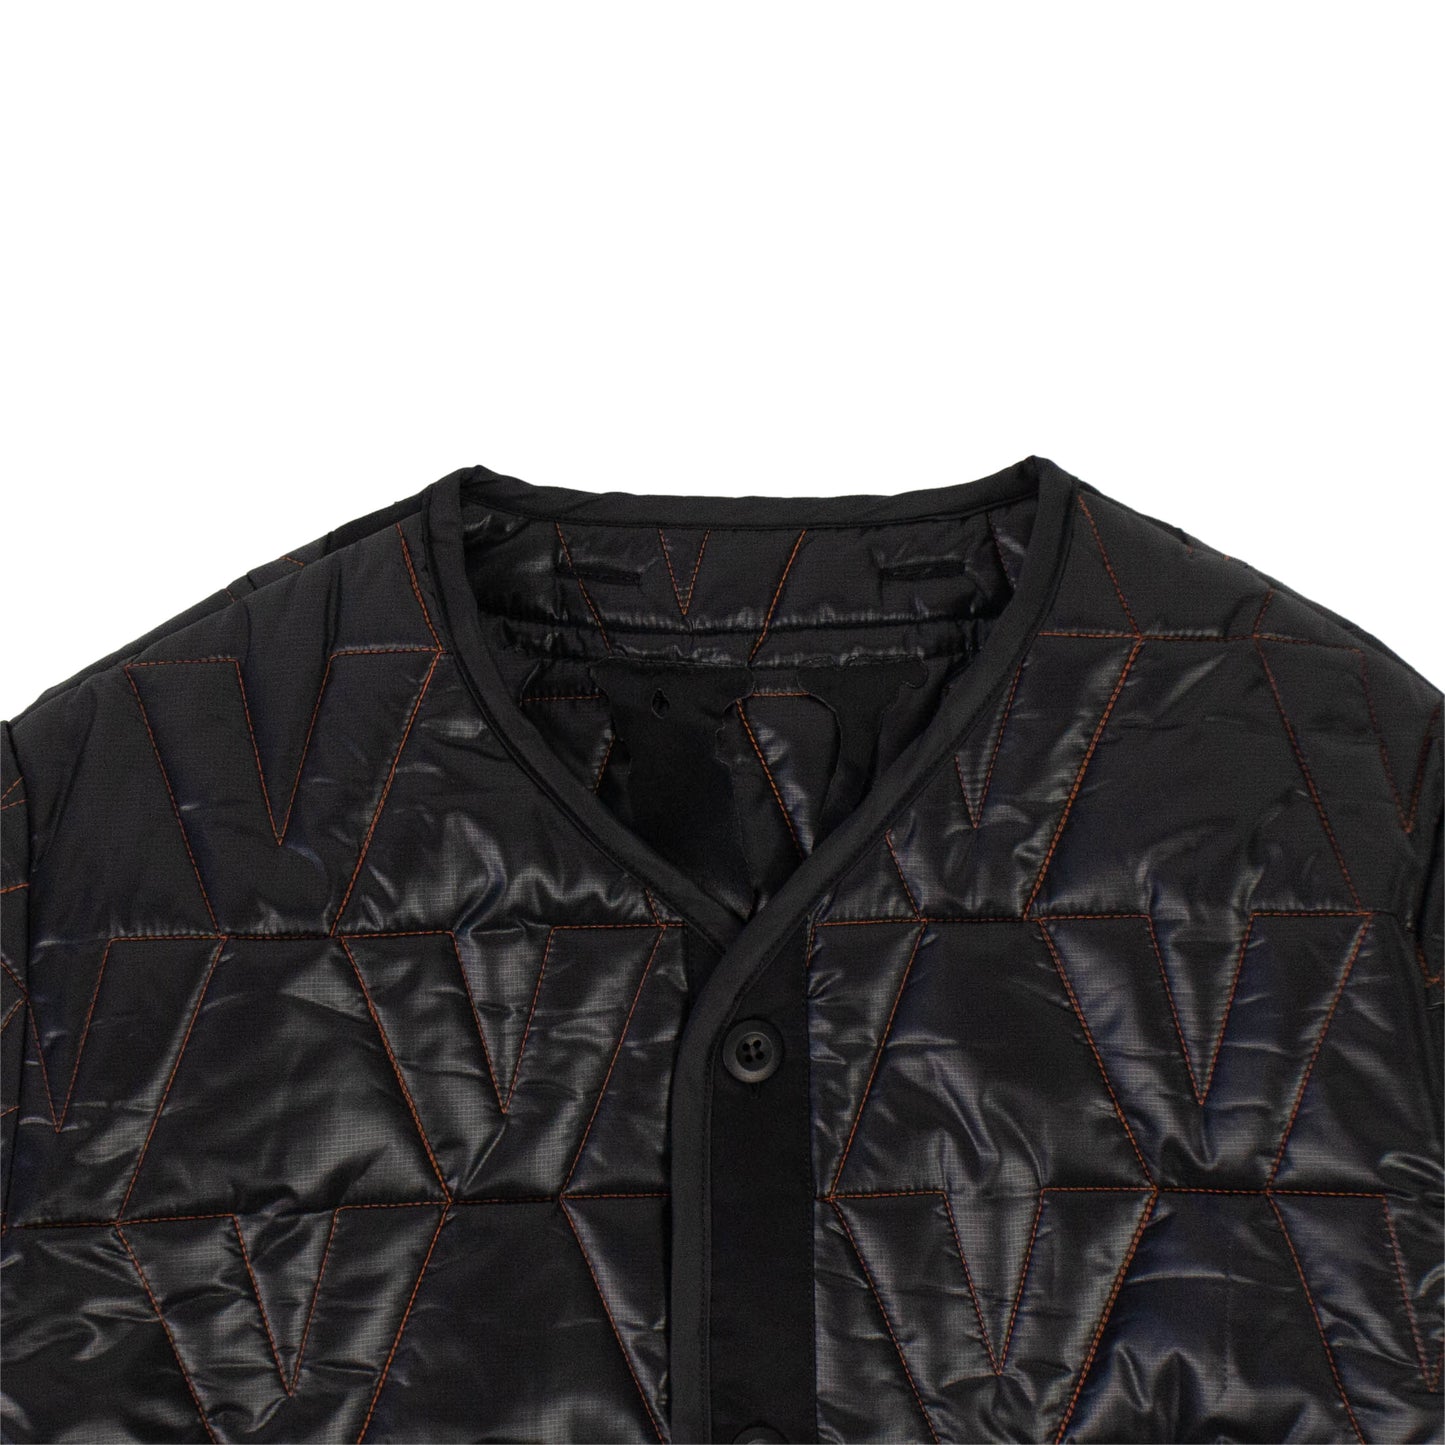 Vlone Quilted Jacket - Black